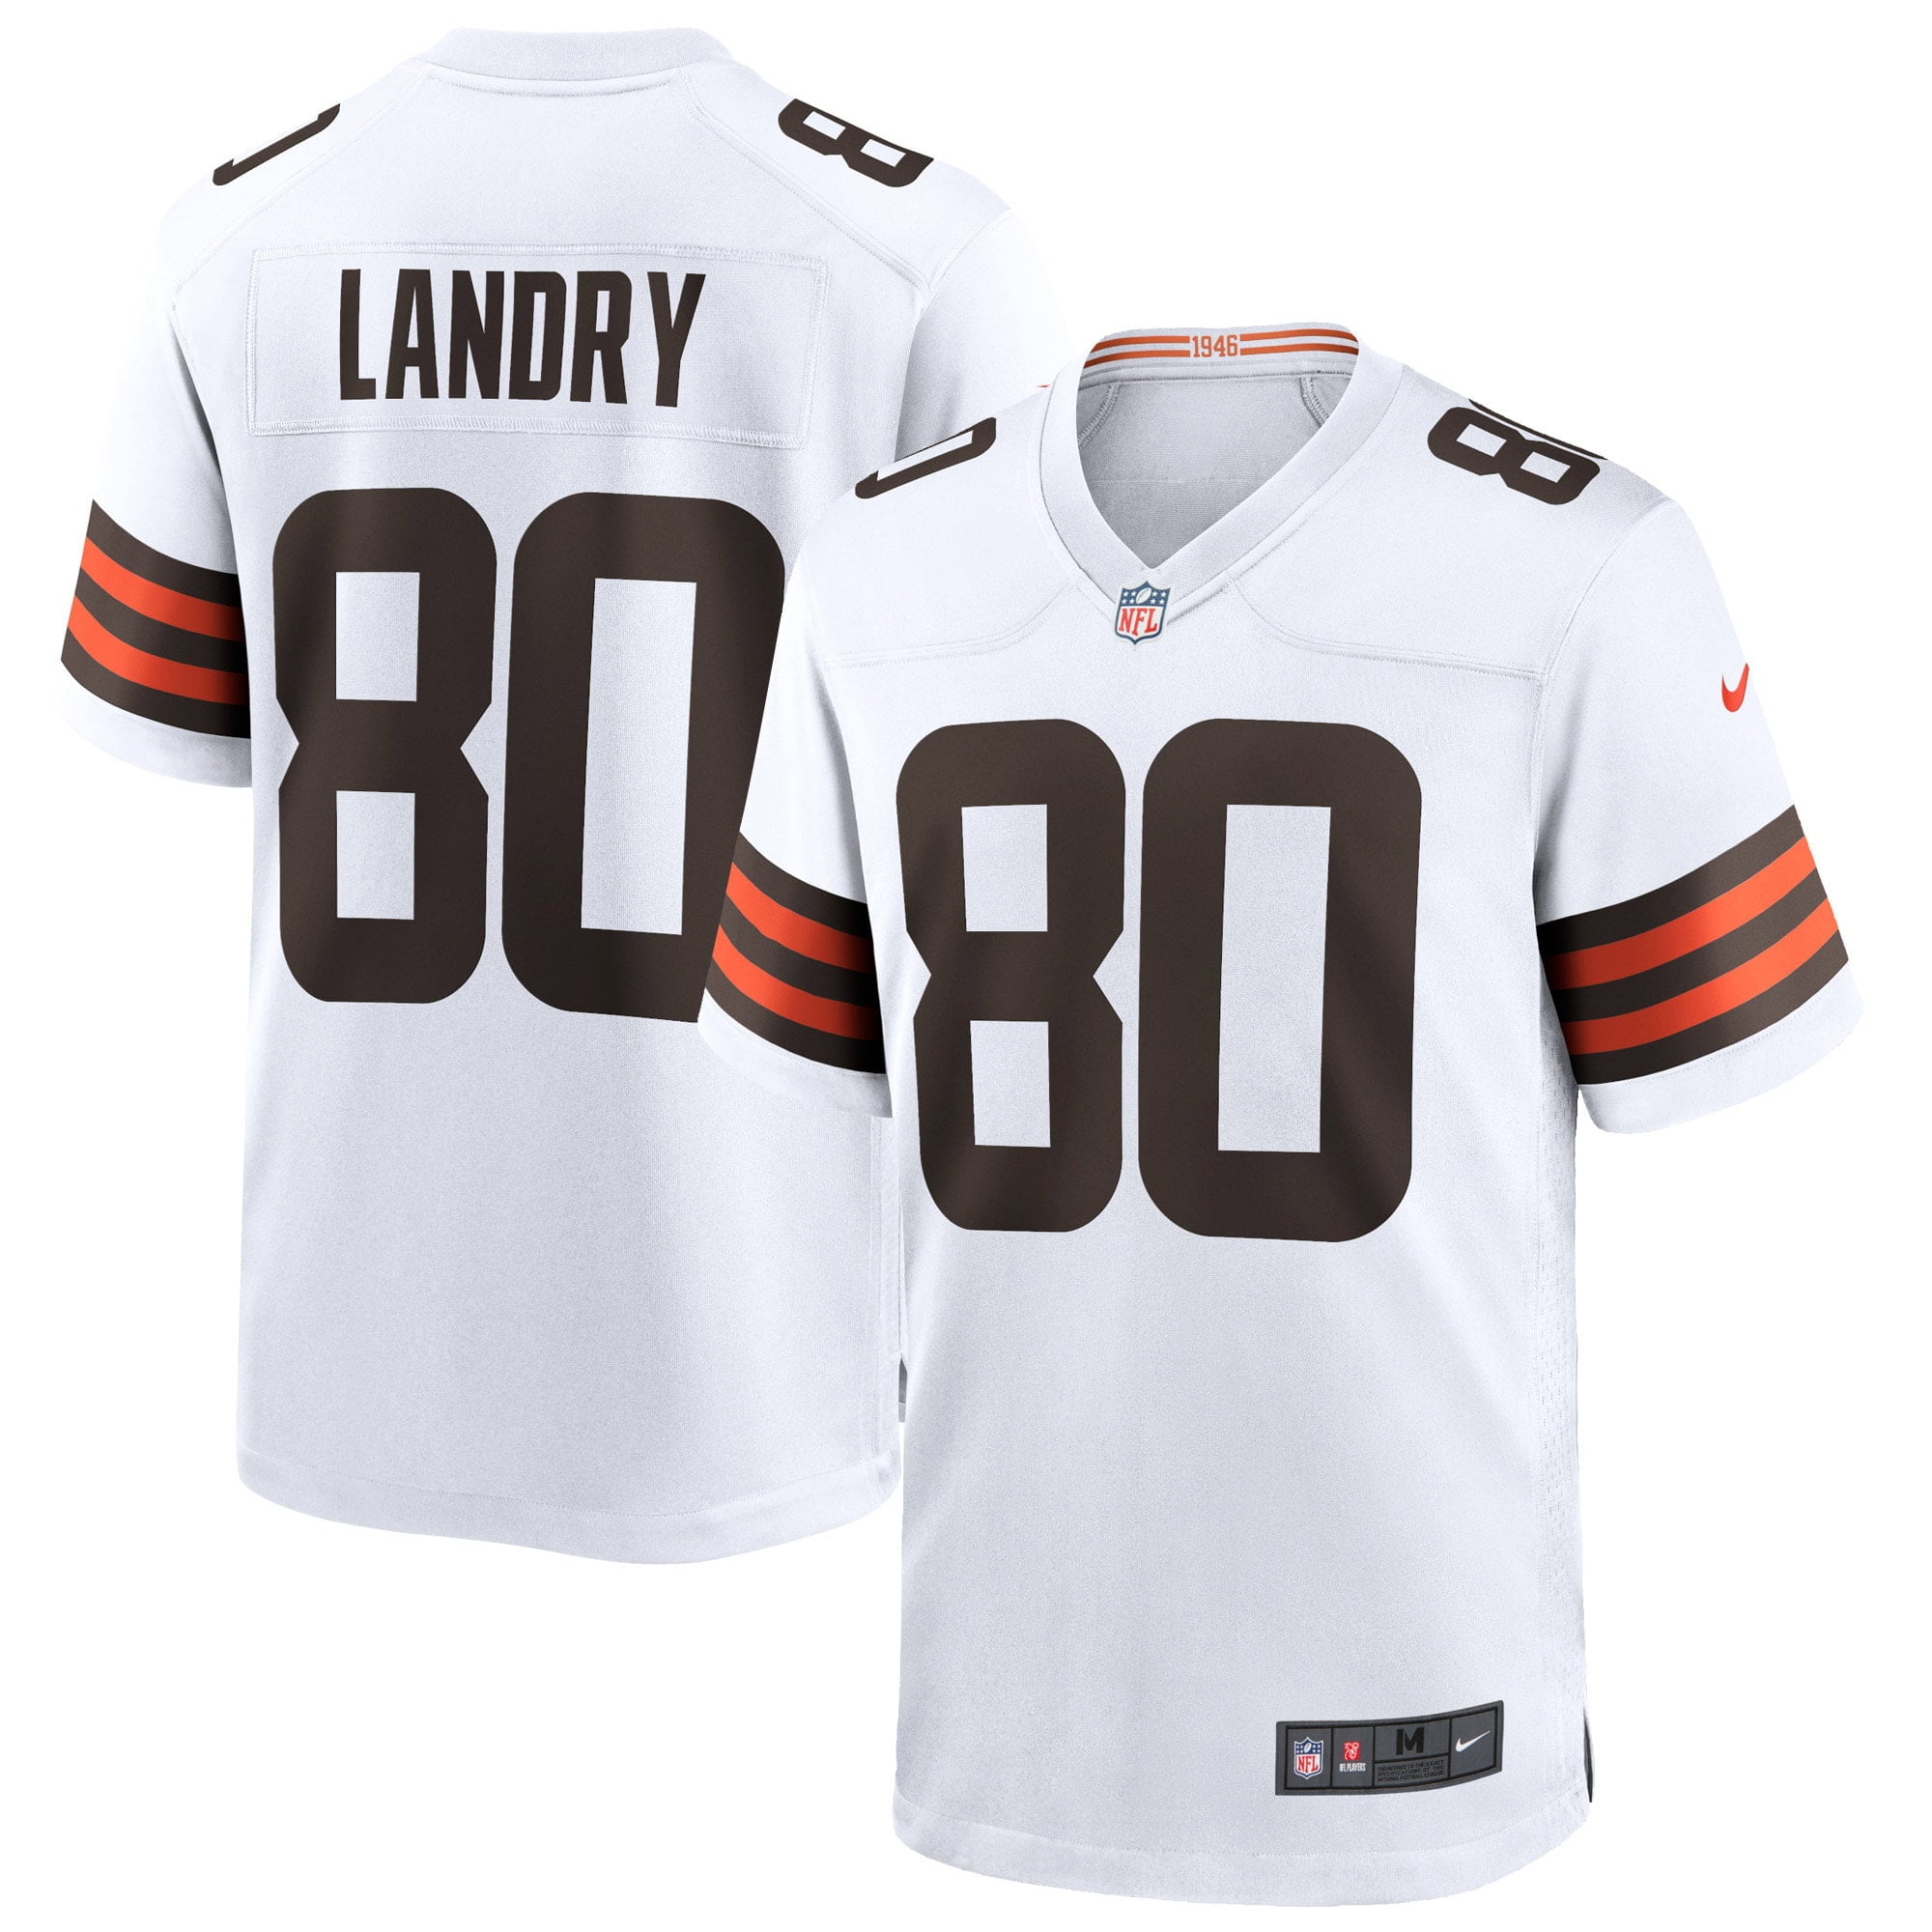 Jarvis Landry Cleveland Browns Nike Game Jersey - White - Walmart.com